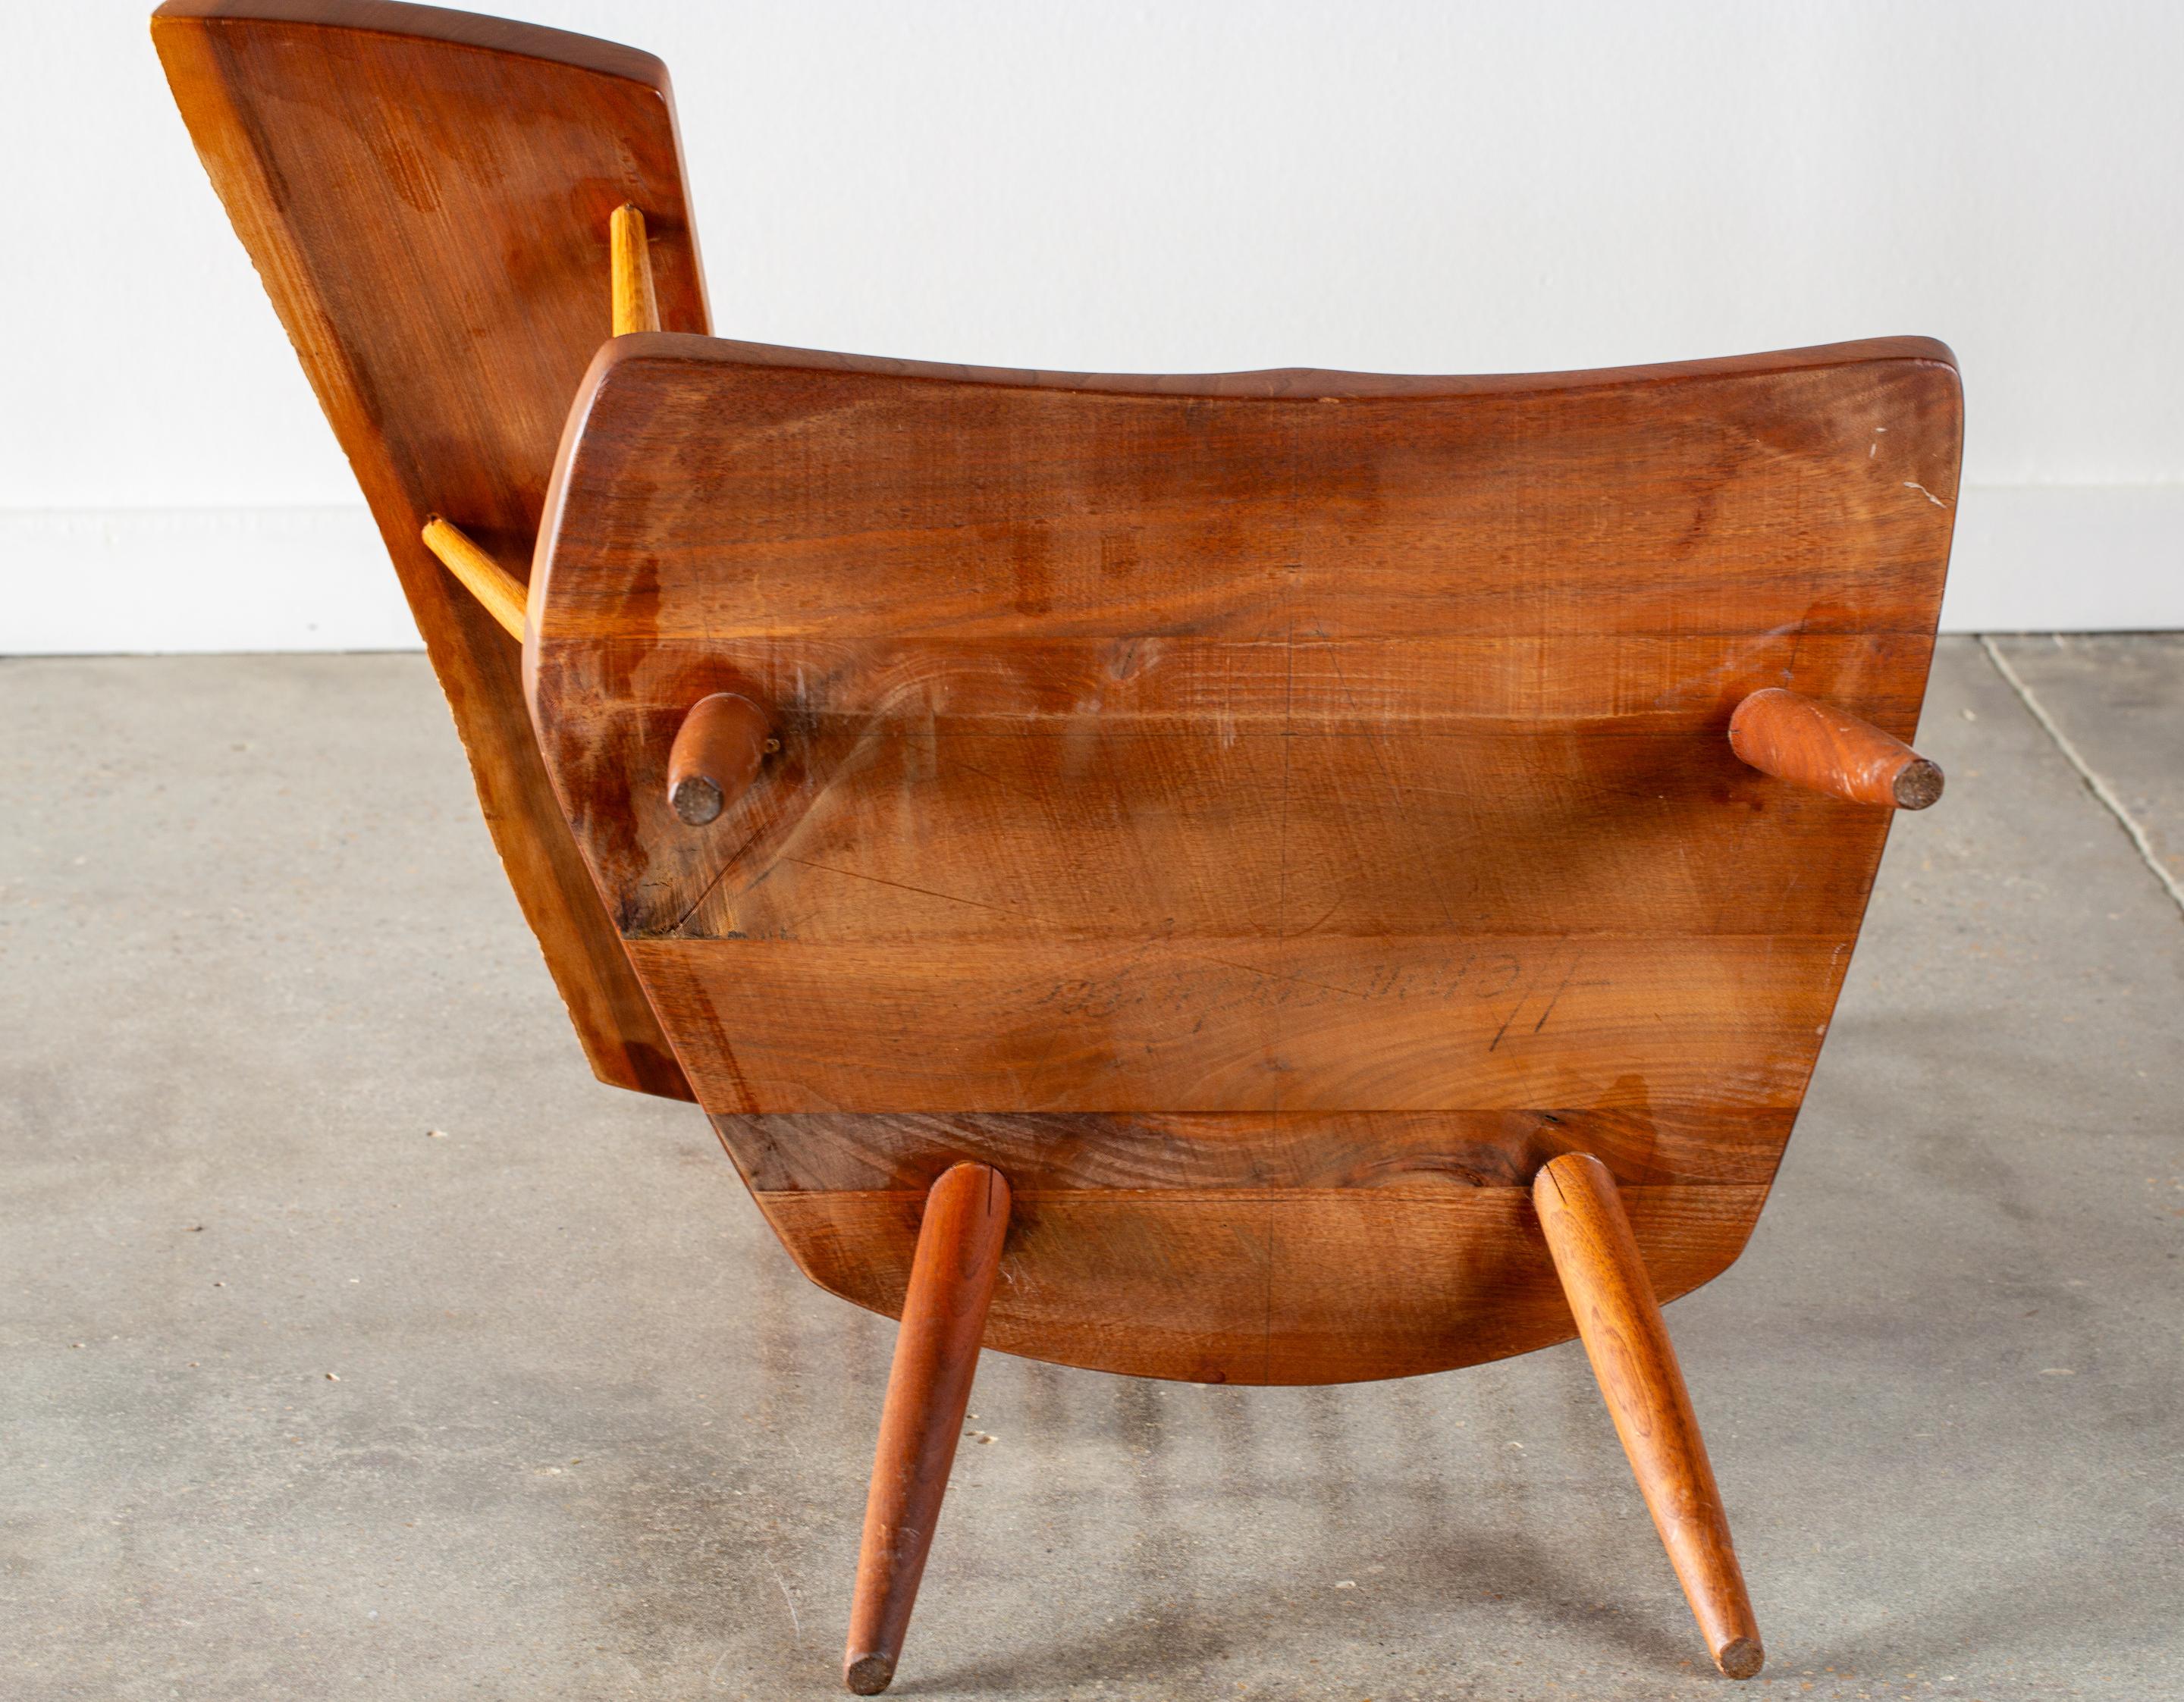 1975 George Nakashima Studio Lounge Chair with Free Form Arm Walnut and Hickory For Sale 7